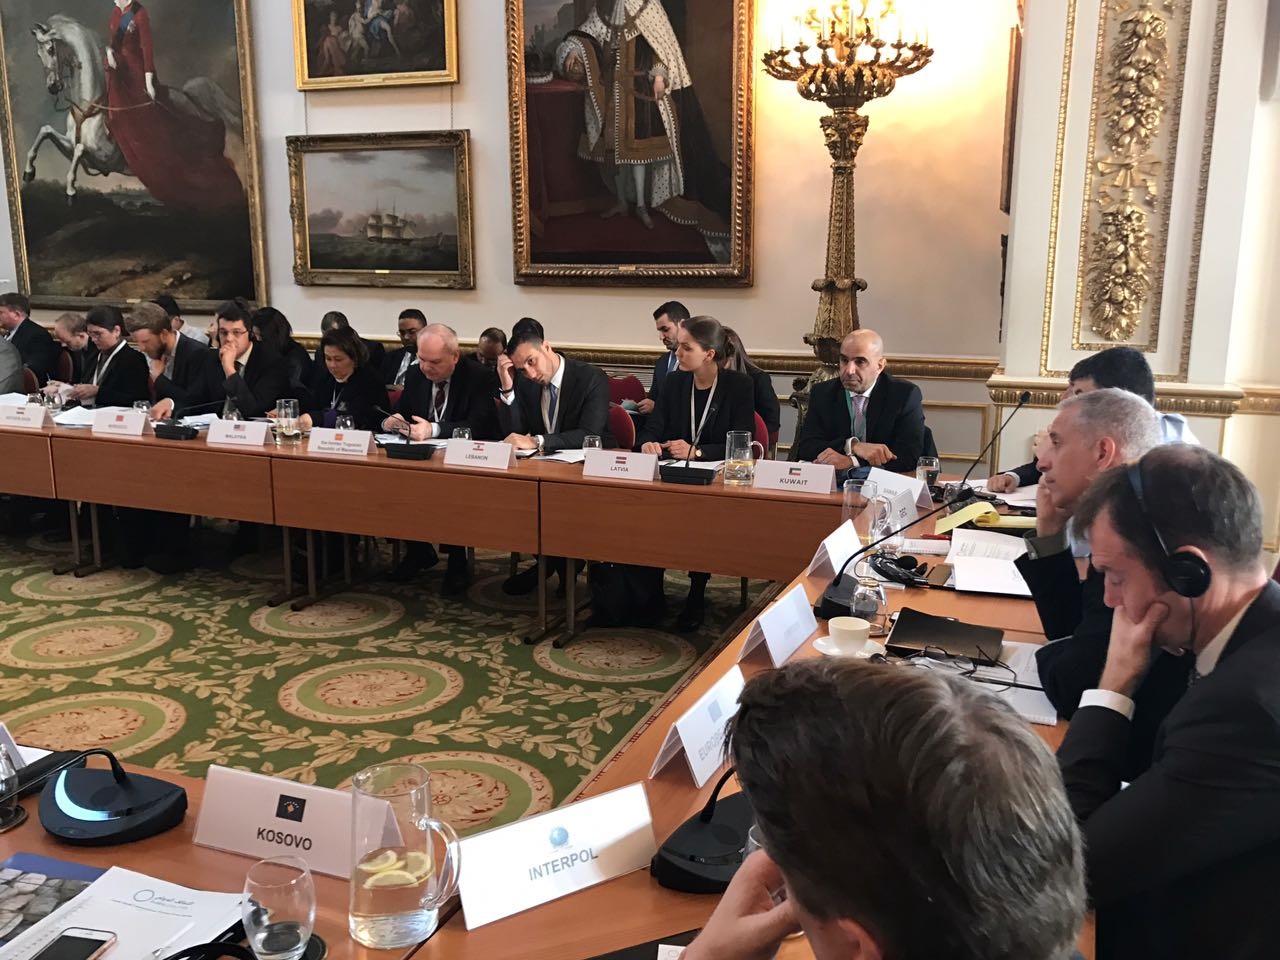 Kuwait's Assistant Foreign Minister for Development and International Cooperation affairs Ambassador Nasser Al-Sabeeh during the meeting of the Coalition's Communications Working Group to Counter IS in London